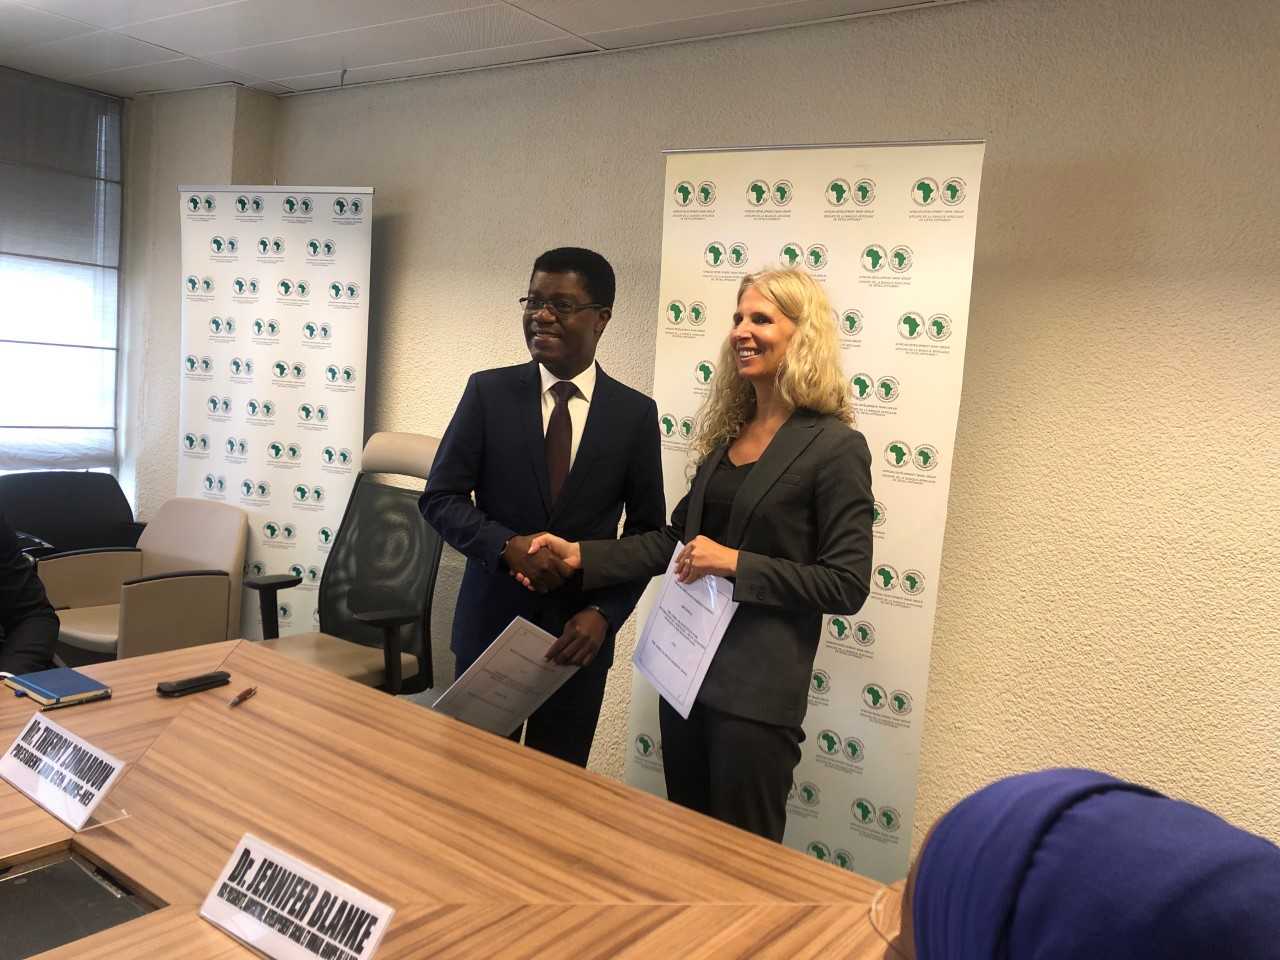 Thierry Zomahoun, President and CEO of AIMS shake hands with